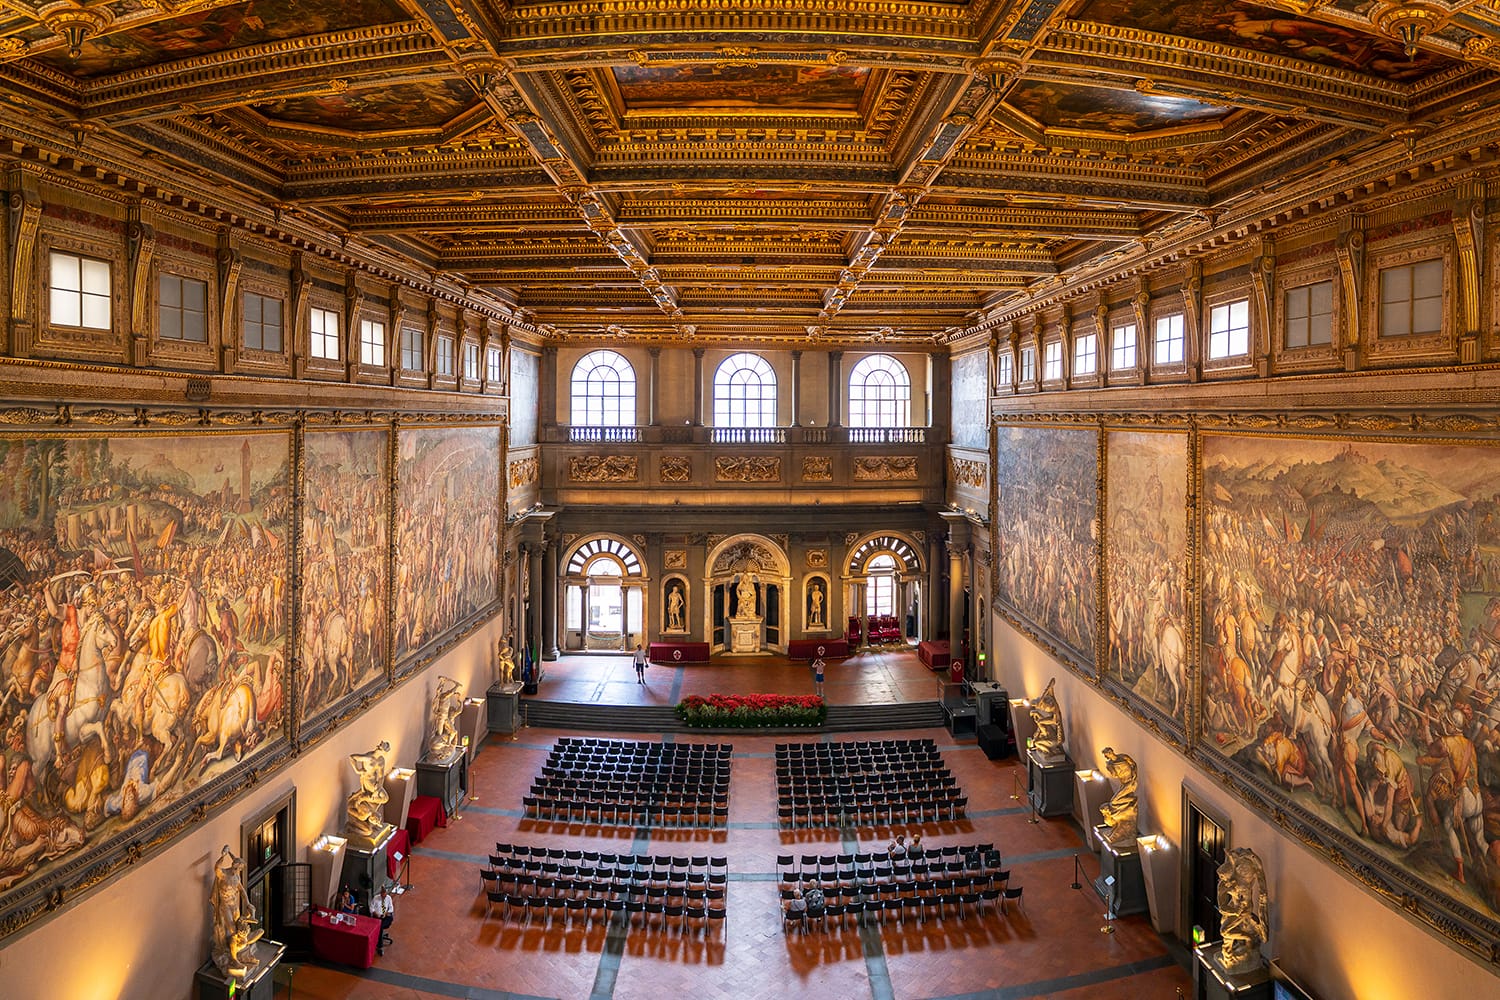 Panoramic view to Salone dei Cinquecento (Hall of the Five Hundred) at Palazzo Vecchio in Florence, Italy